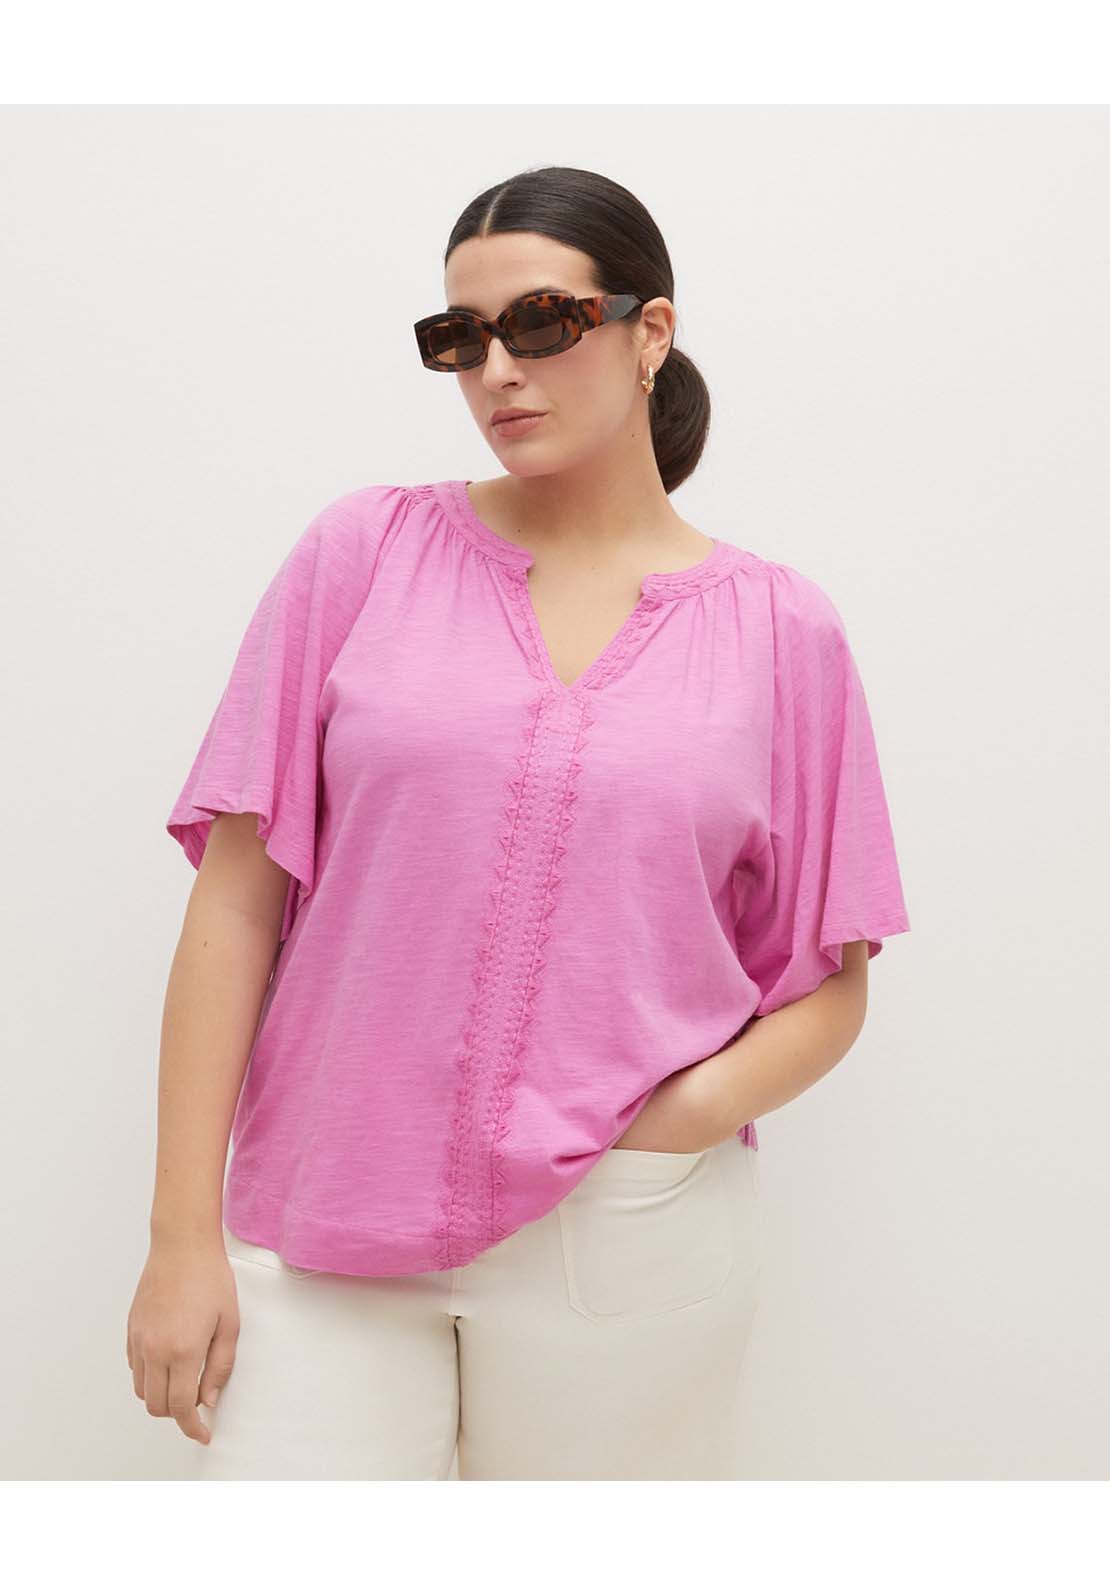 Couchel V-neck Tshirt - Pink 1 Shaws Department Stores